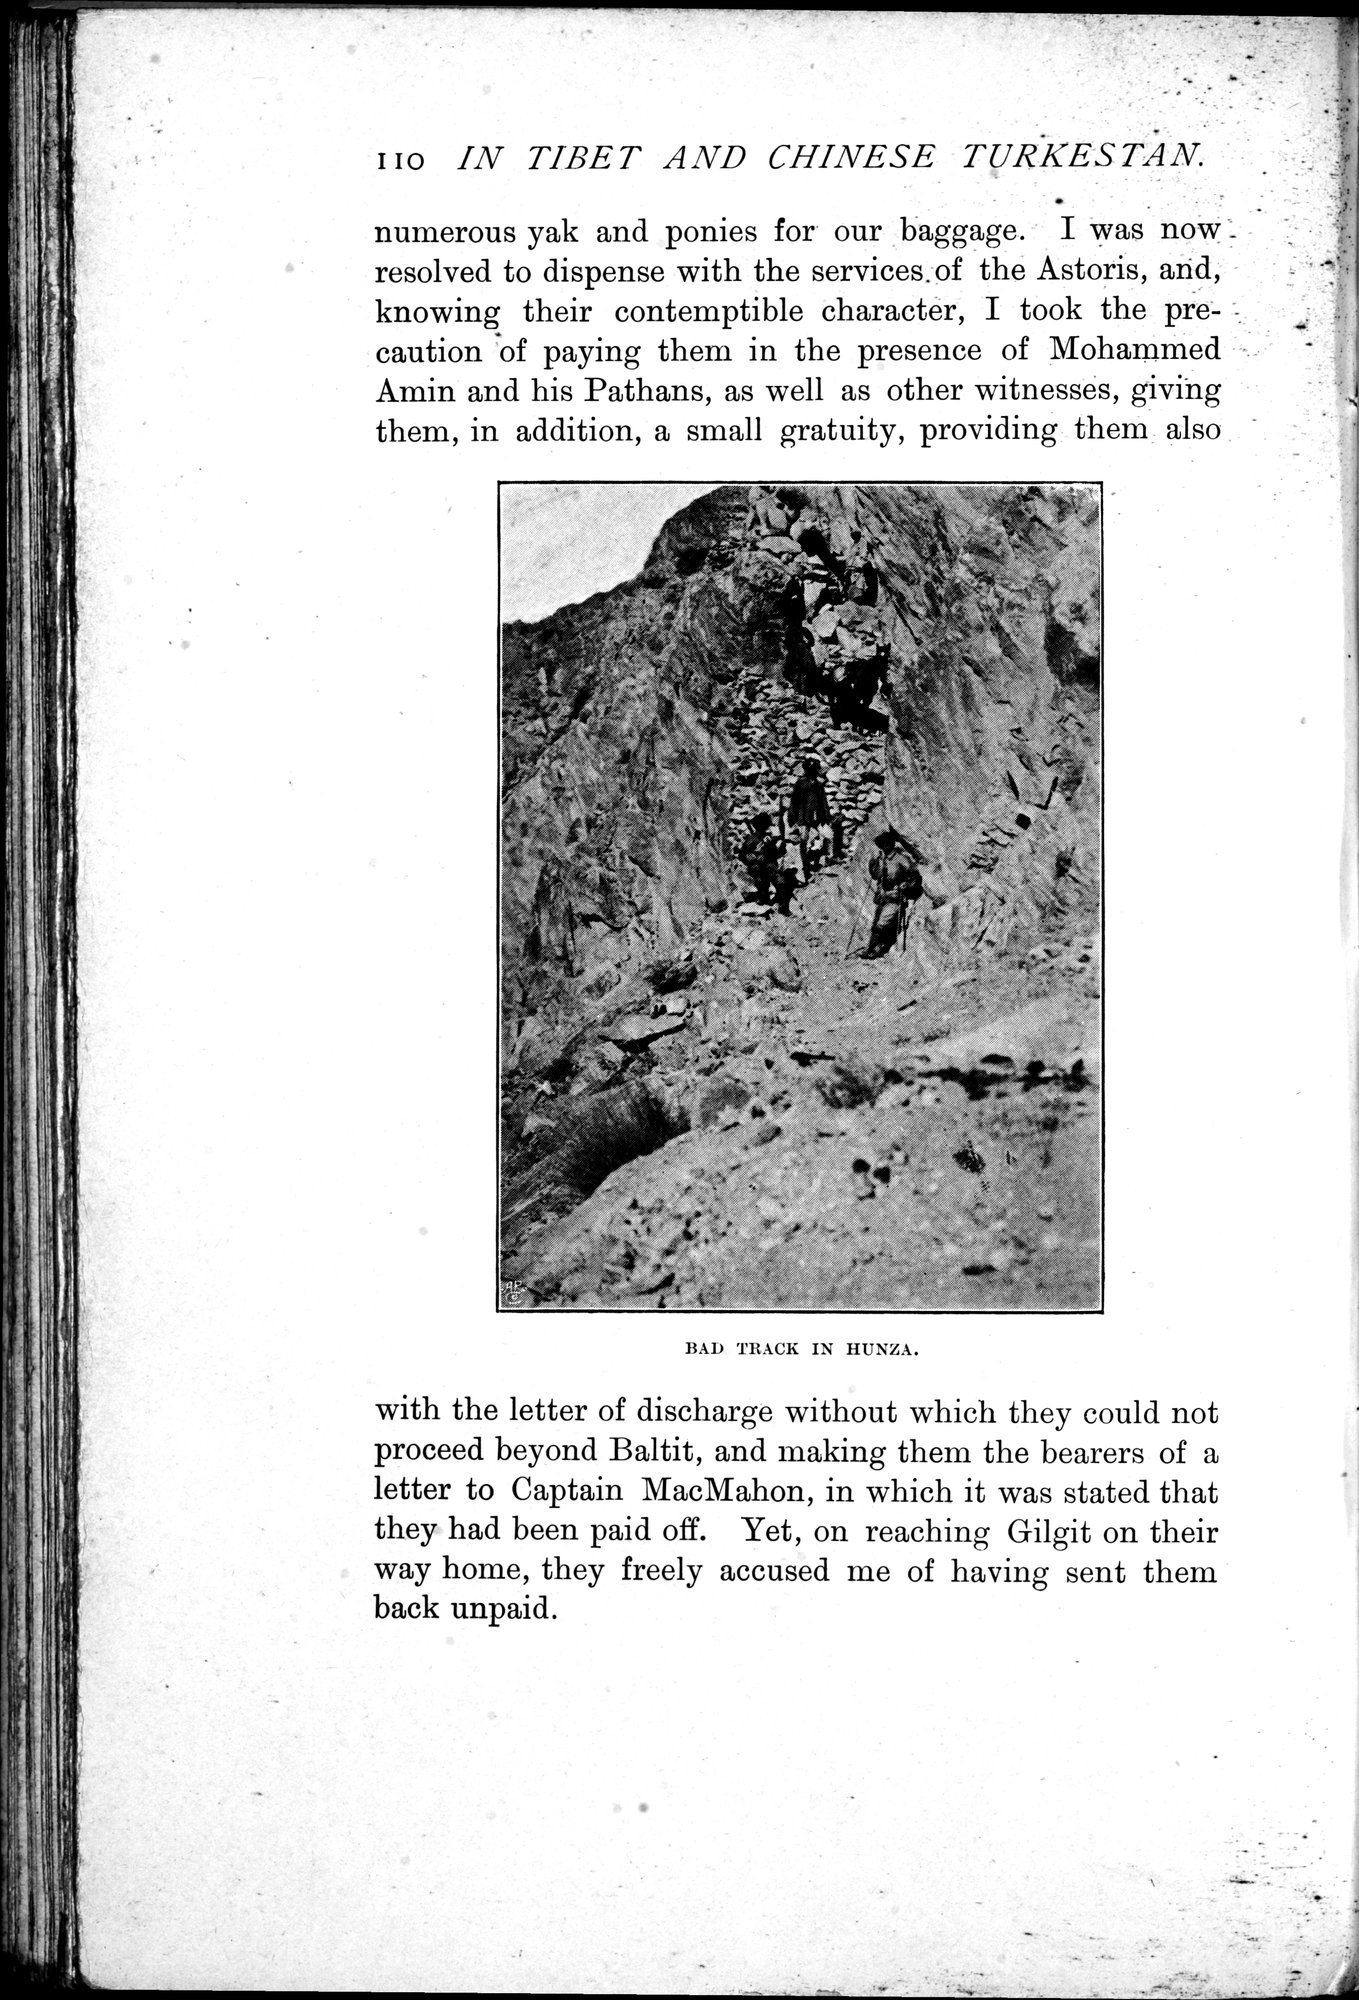 In Tibet and Chinese Turkestan : vol.1 / Page 142 (Grayscale High Resolution Image)